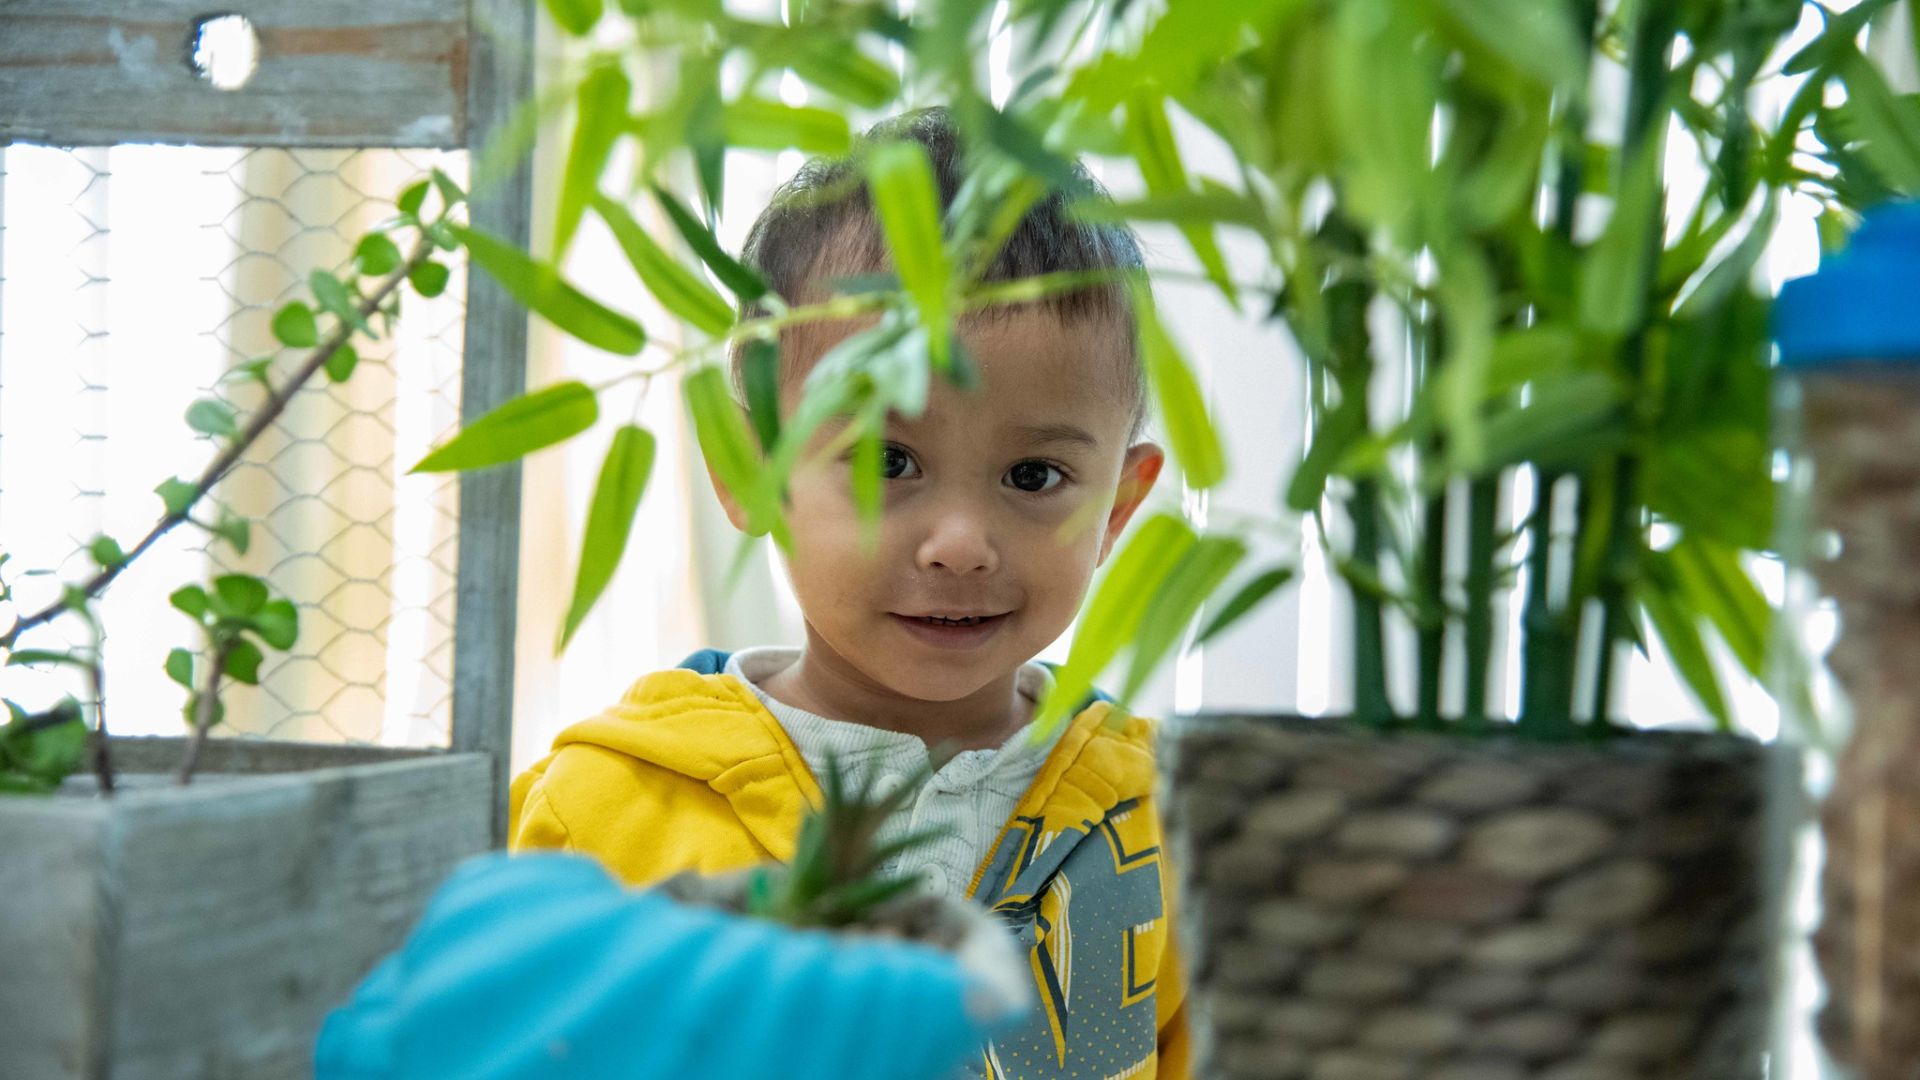 A young boy, behind a plant, smiles at the camera.